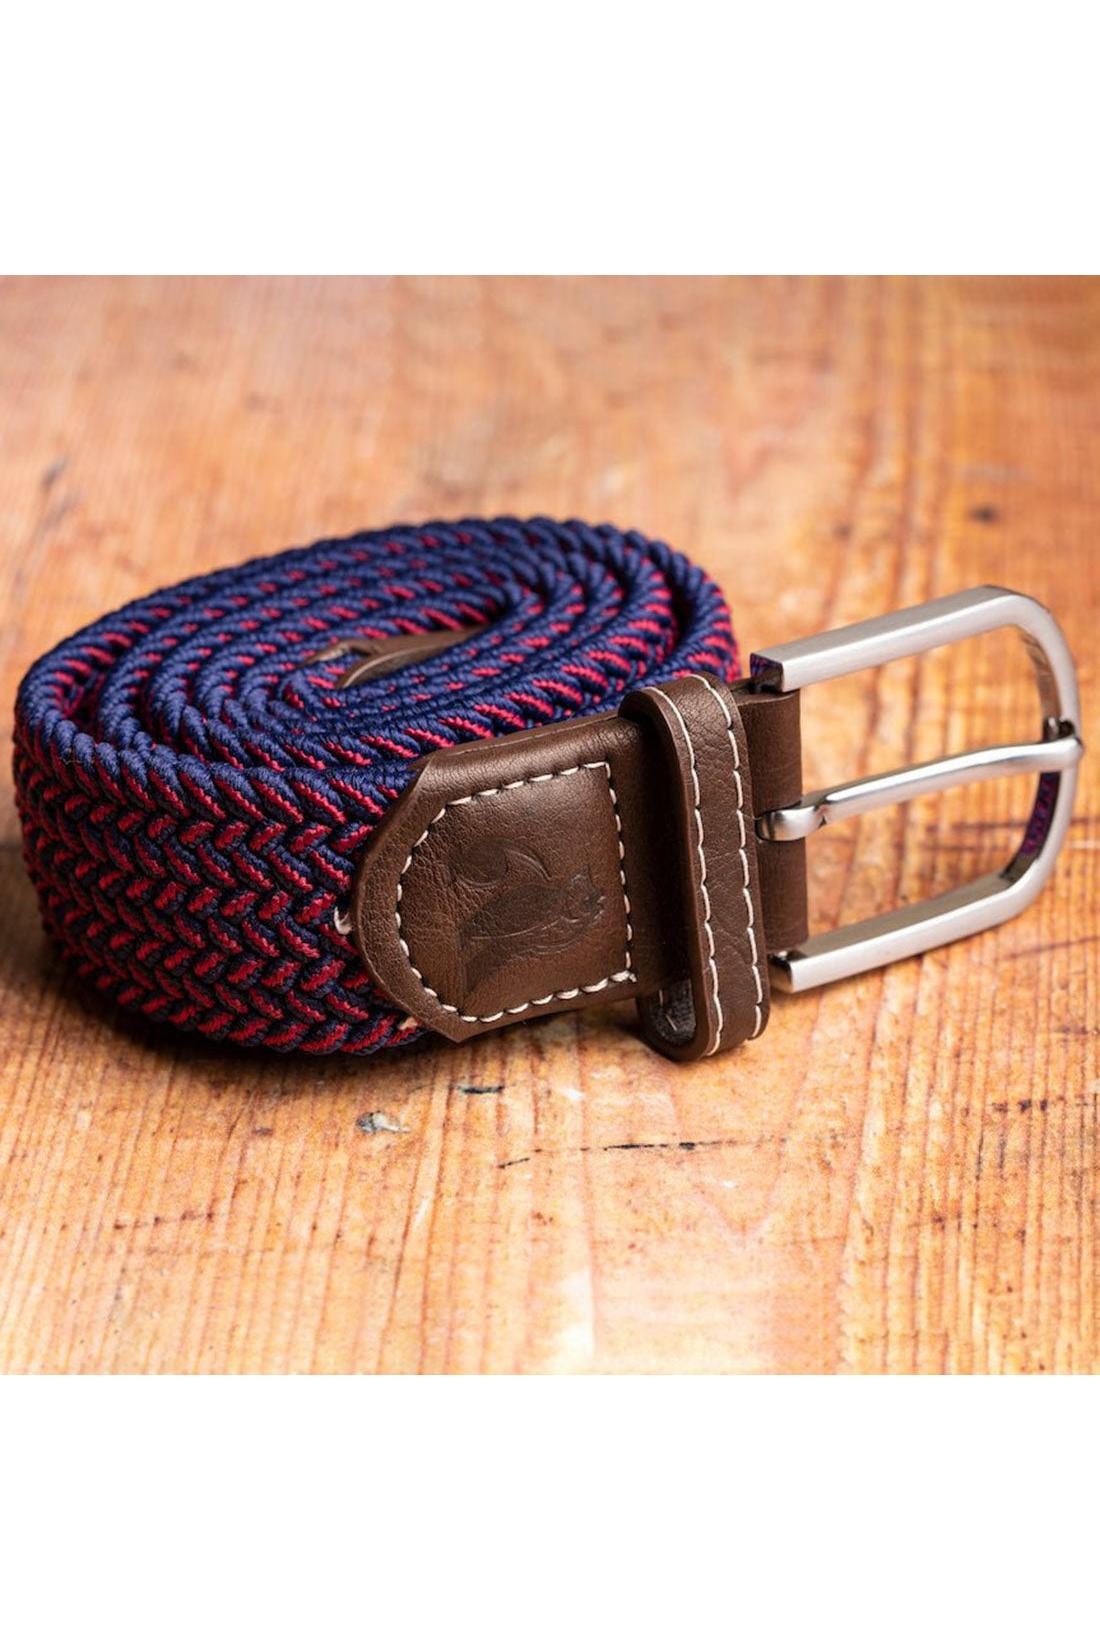 Unisex Woven Belt - Blue / Red Zigzag-Side View